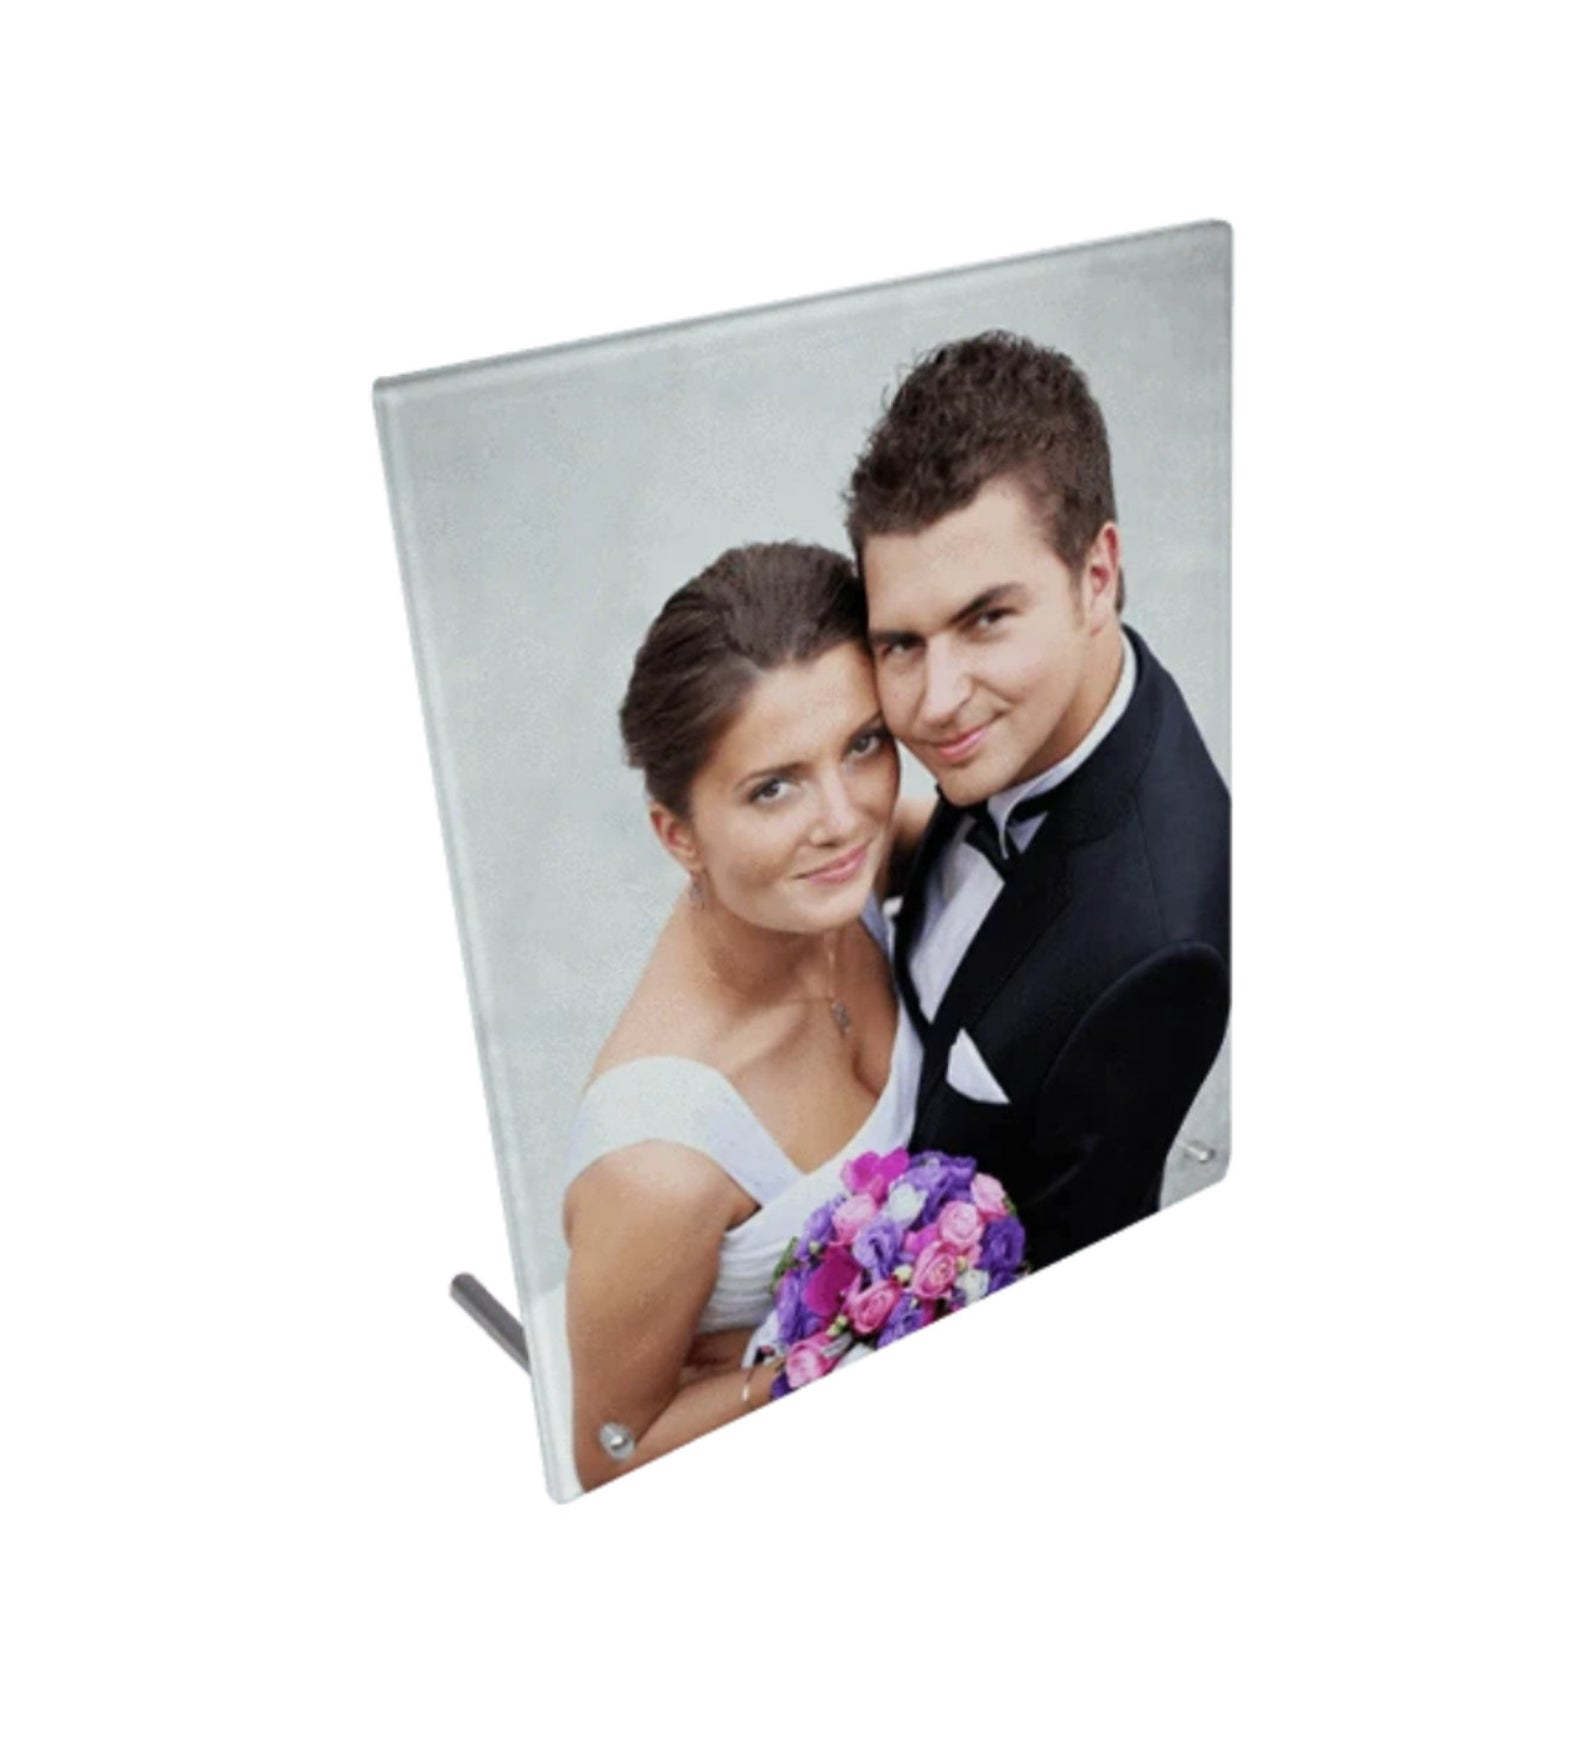 Customise Your Own Glass Photo Frame, With Your Text/Image